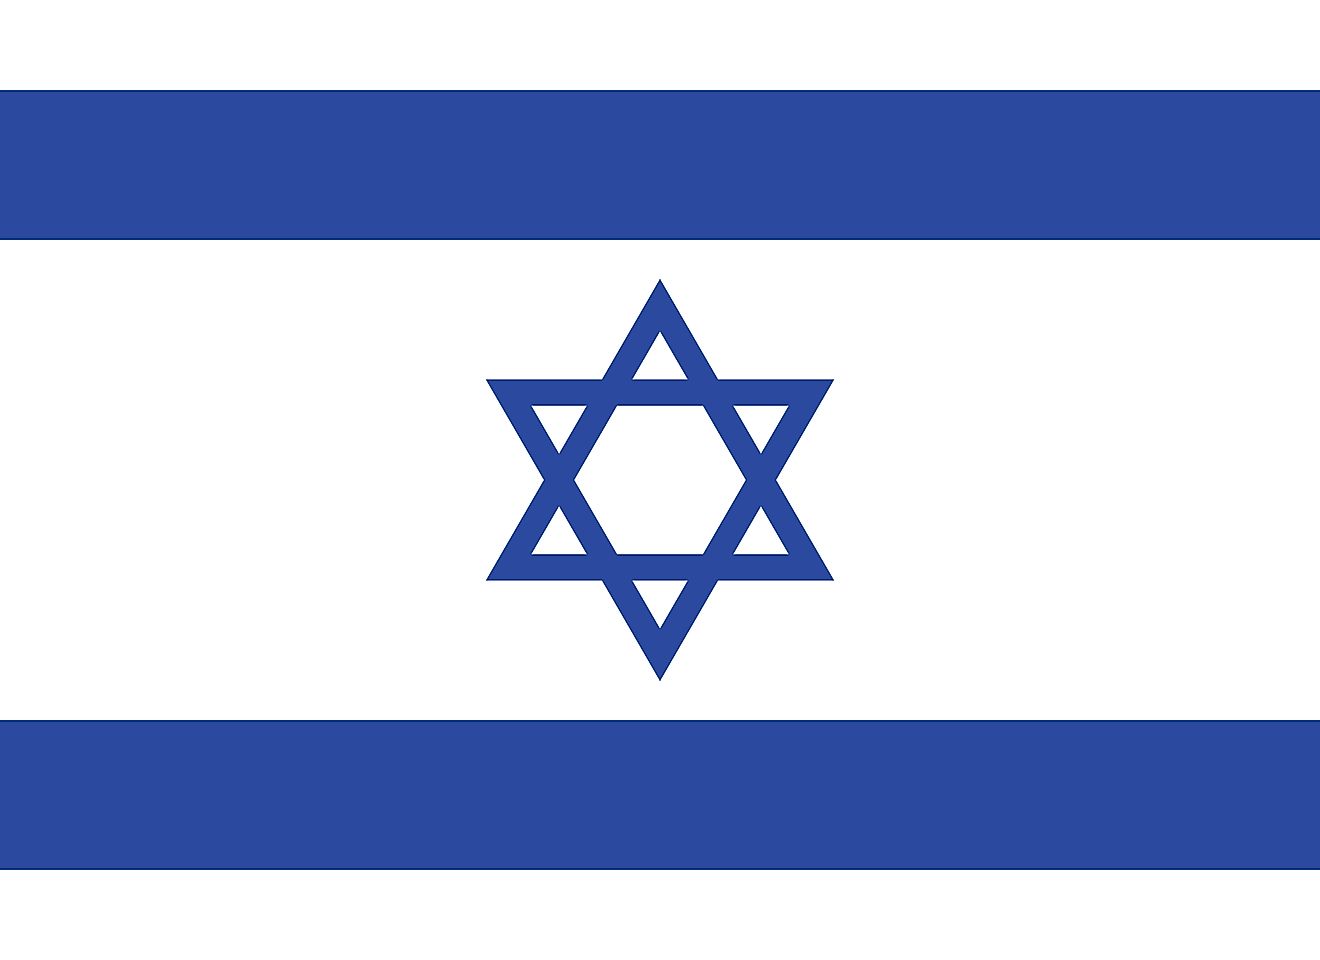 The flag of Israel  consists of white band with a blue hexagram centered between two equal horizontal blue bands